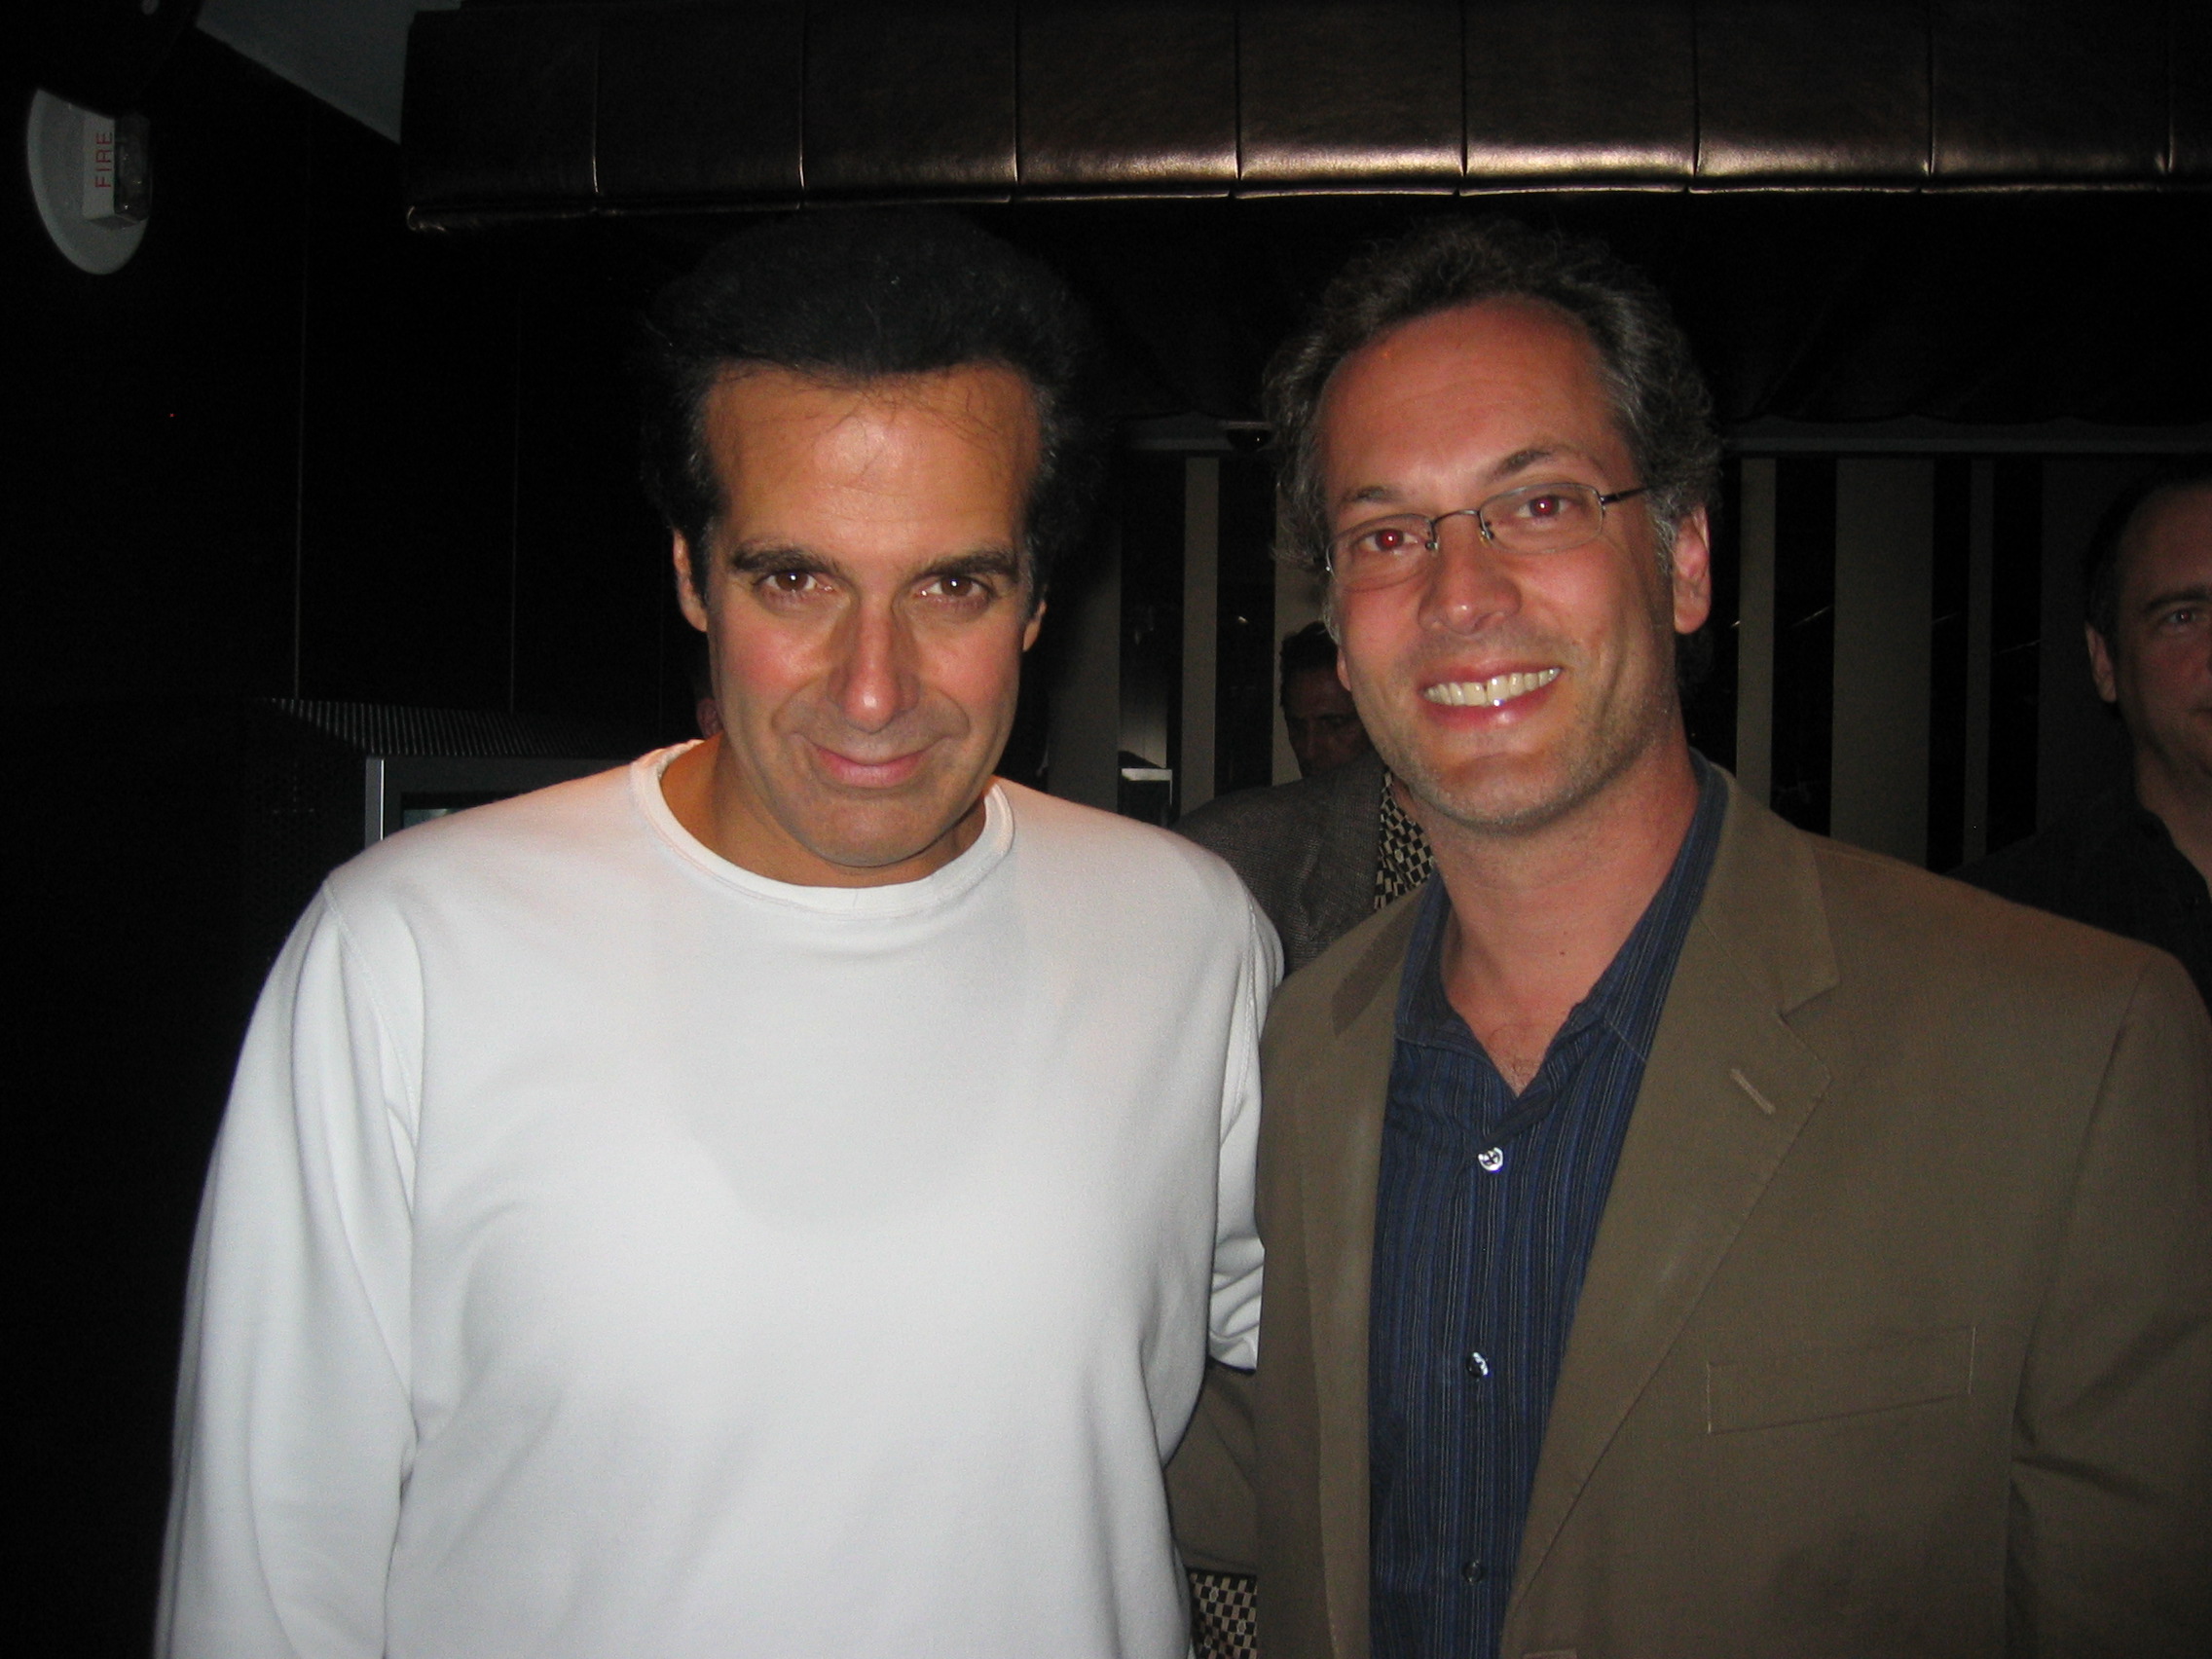 David Copperfield and Todd Felderstein at the Project Magic anniversary celebration at the MGM Grand.